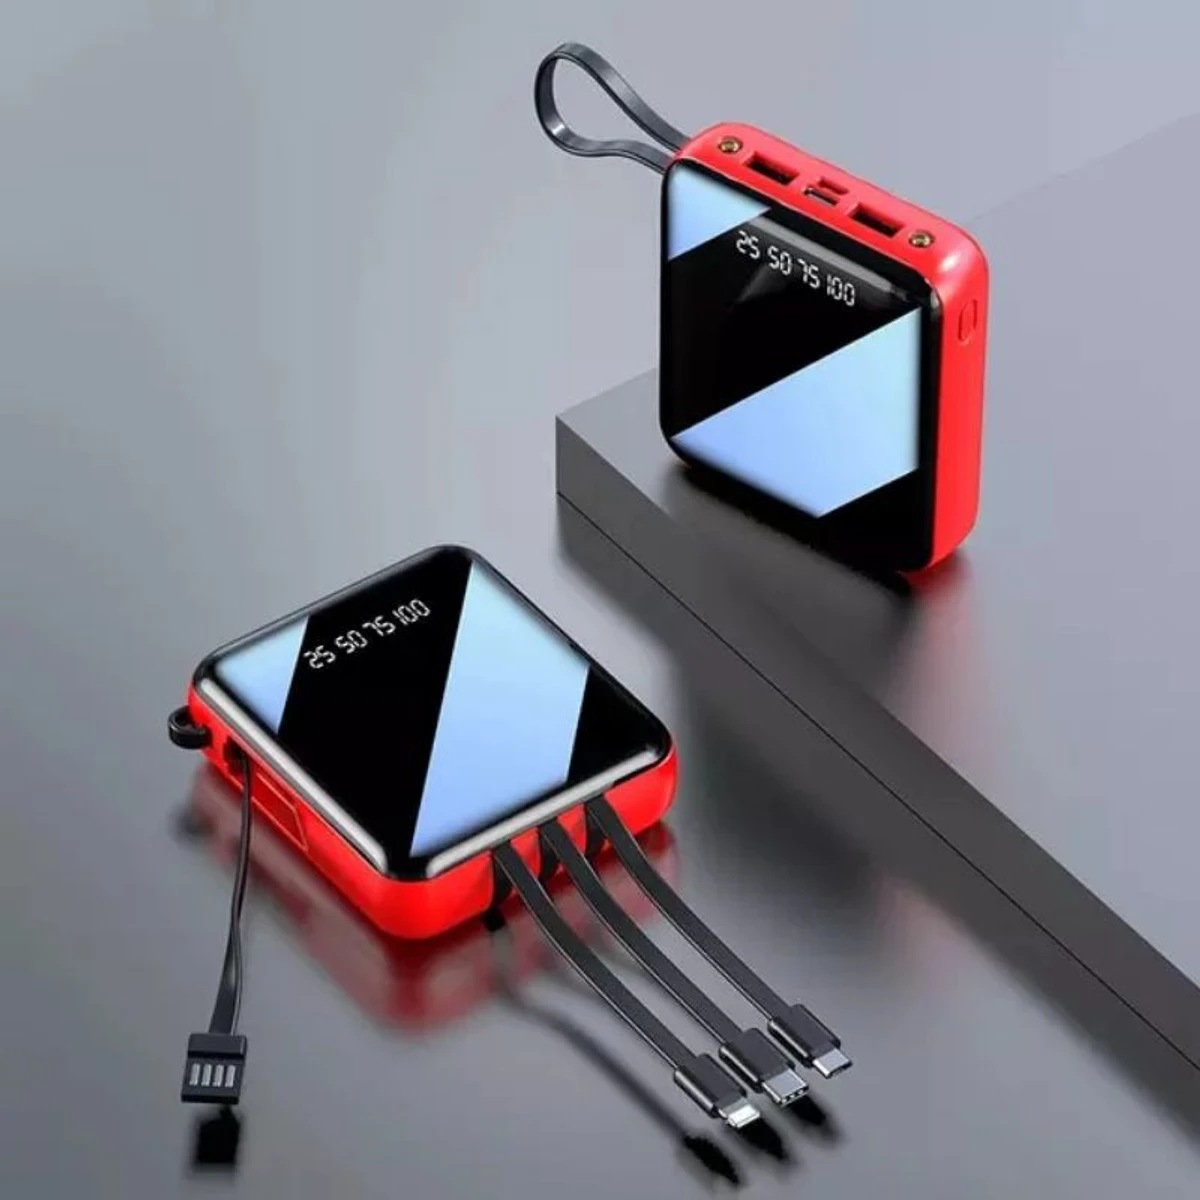 LED Display with 20000 MAH Power bank and All in One Cable set